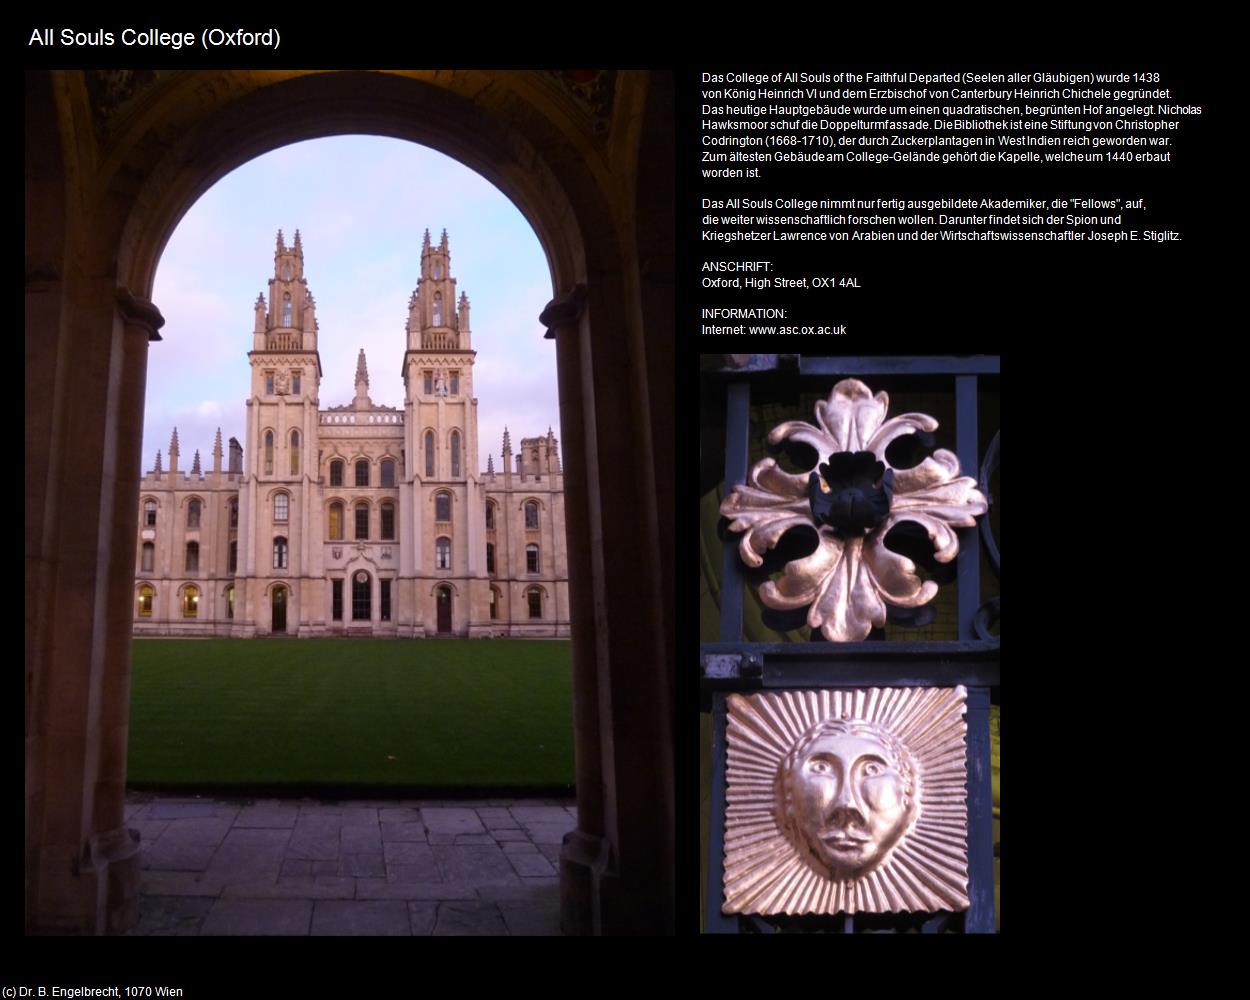 All Souls College (Oxford, England) in Kulturatlas-ENGLAND und WALES